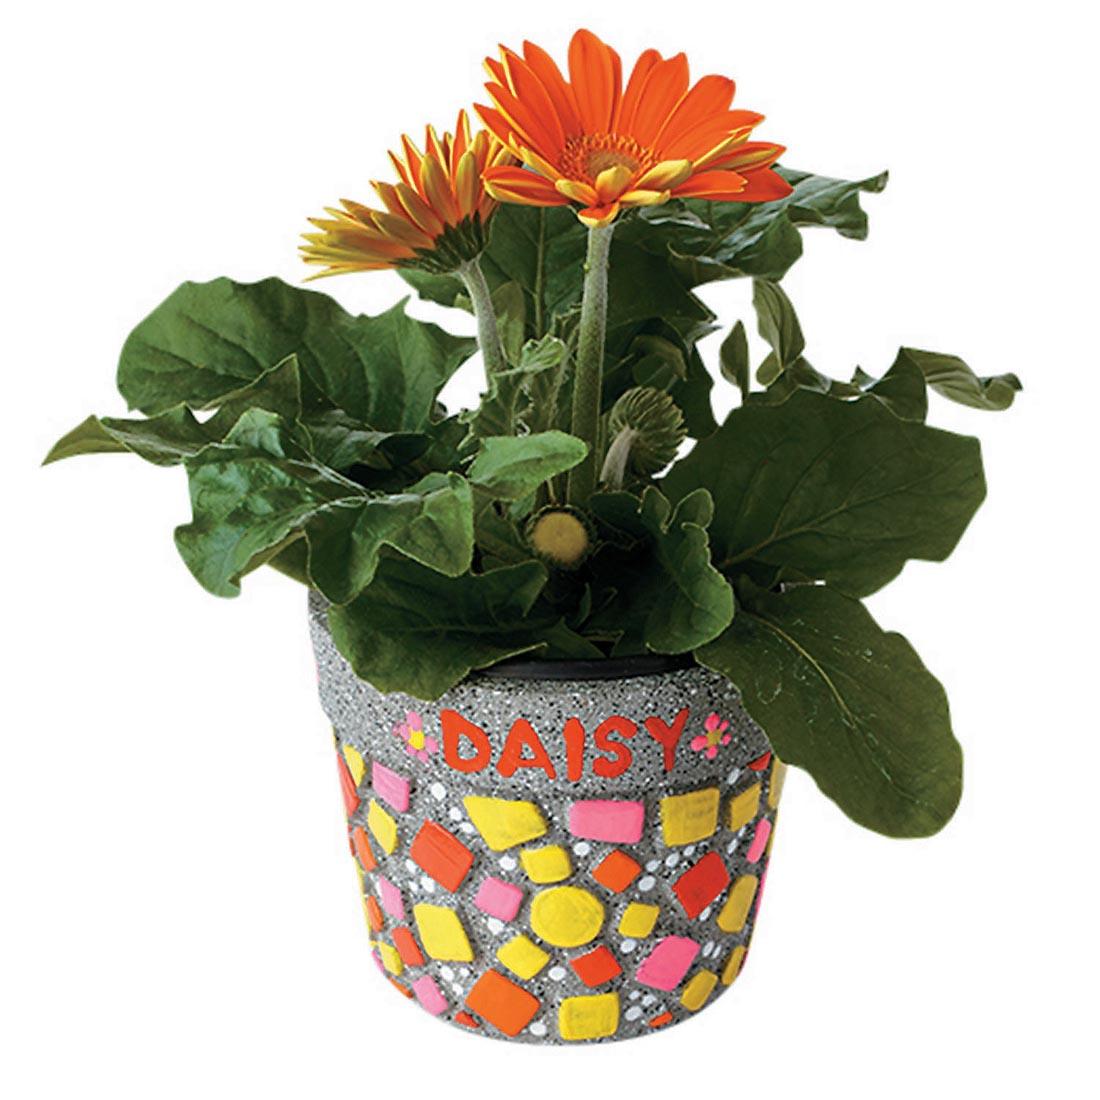 Completed Paint Your Own Stone Mosaic Flower Pot by Mindware shown in use